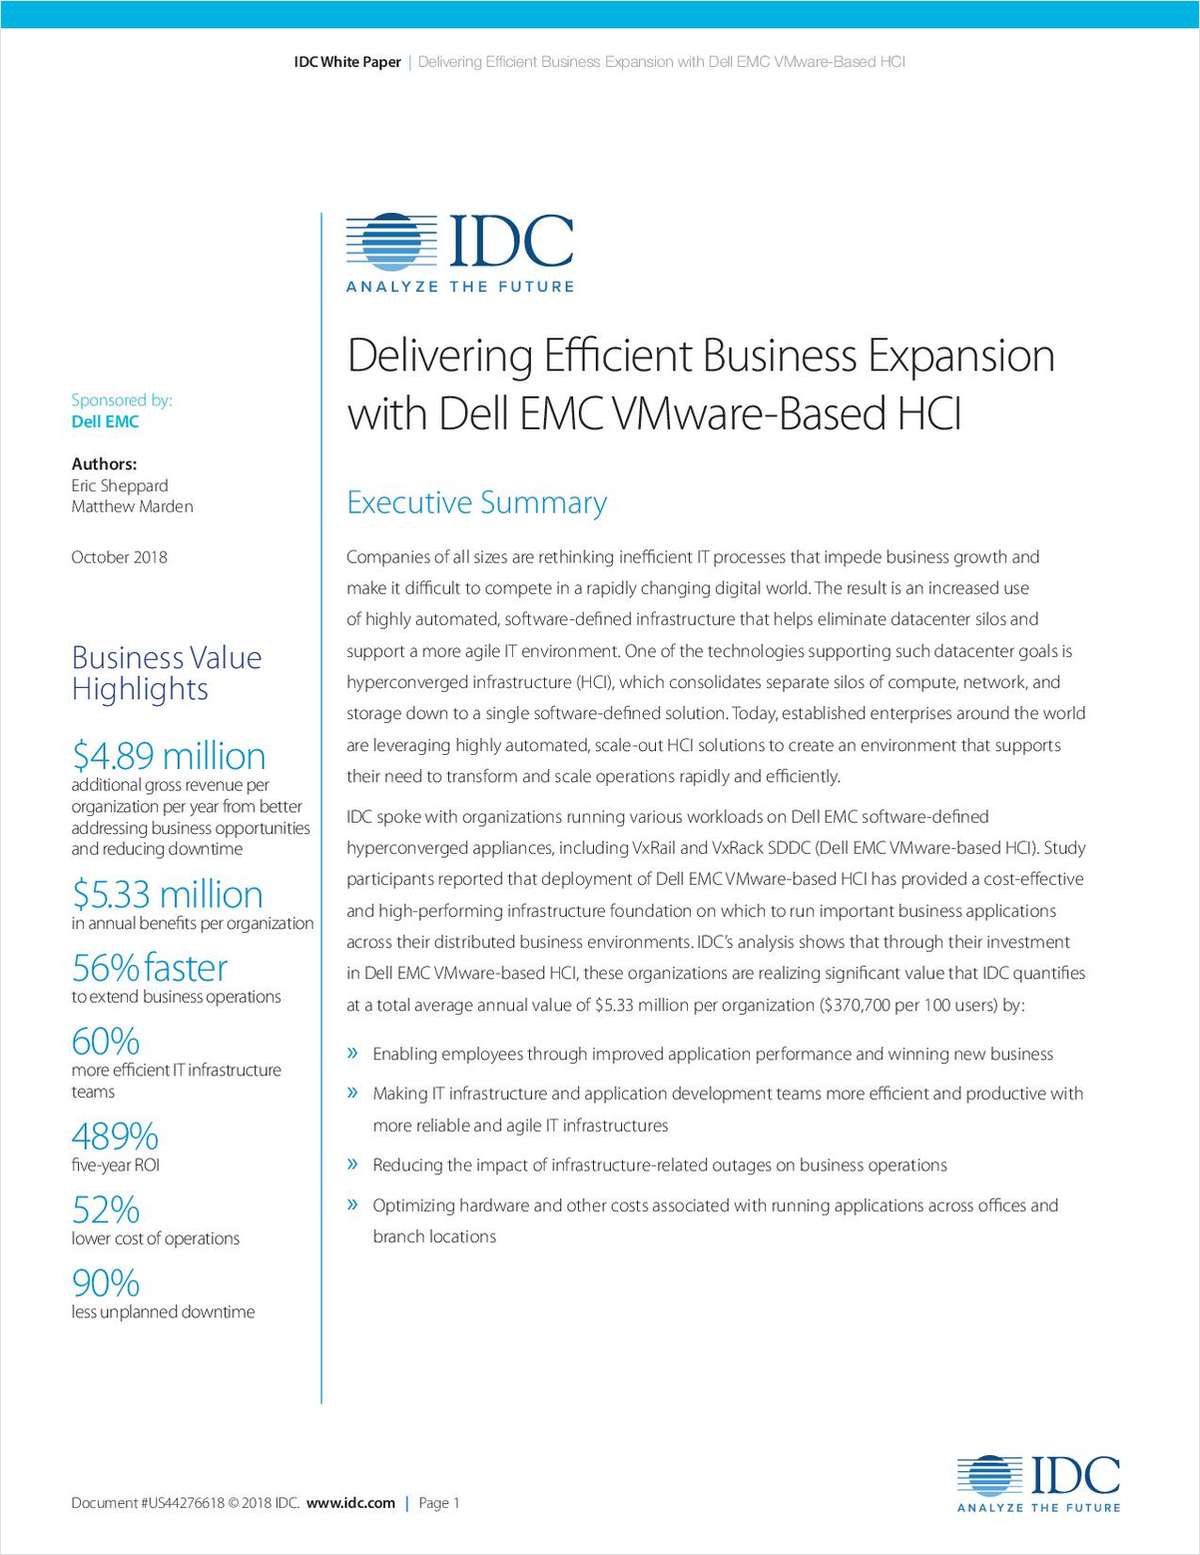 Delivering Efficient Business Expansion with Dell EMC VMware-Based HCI